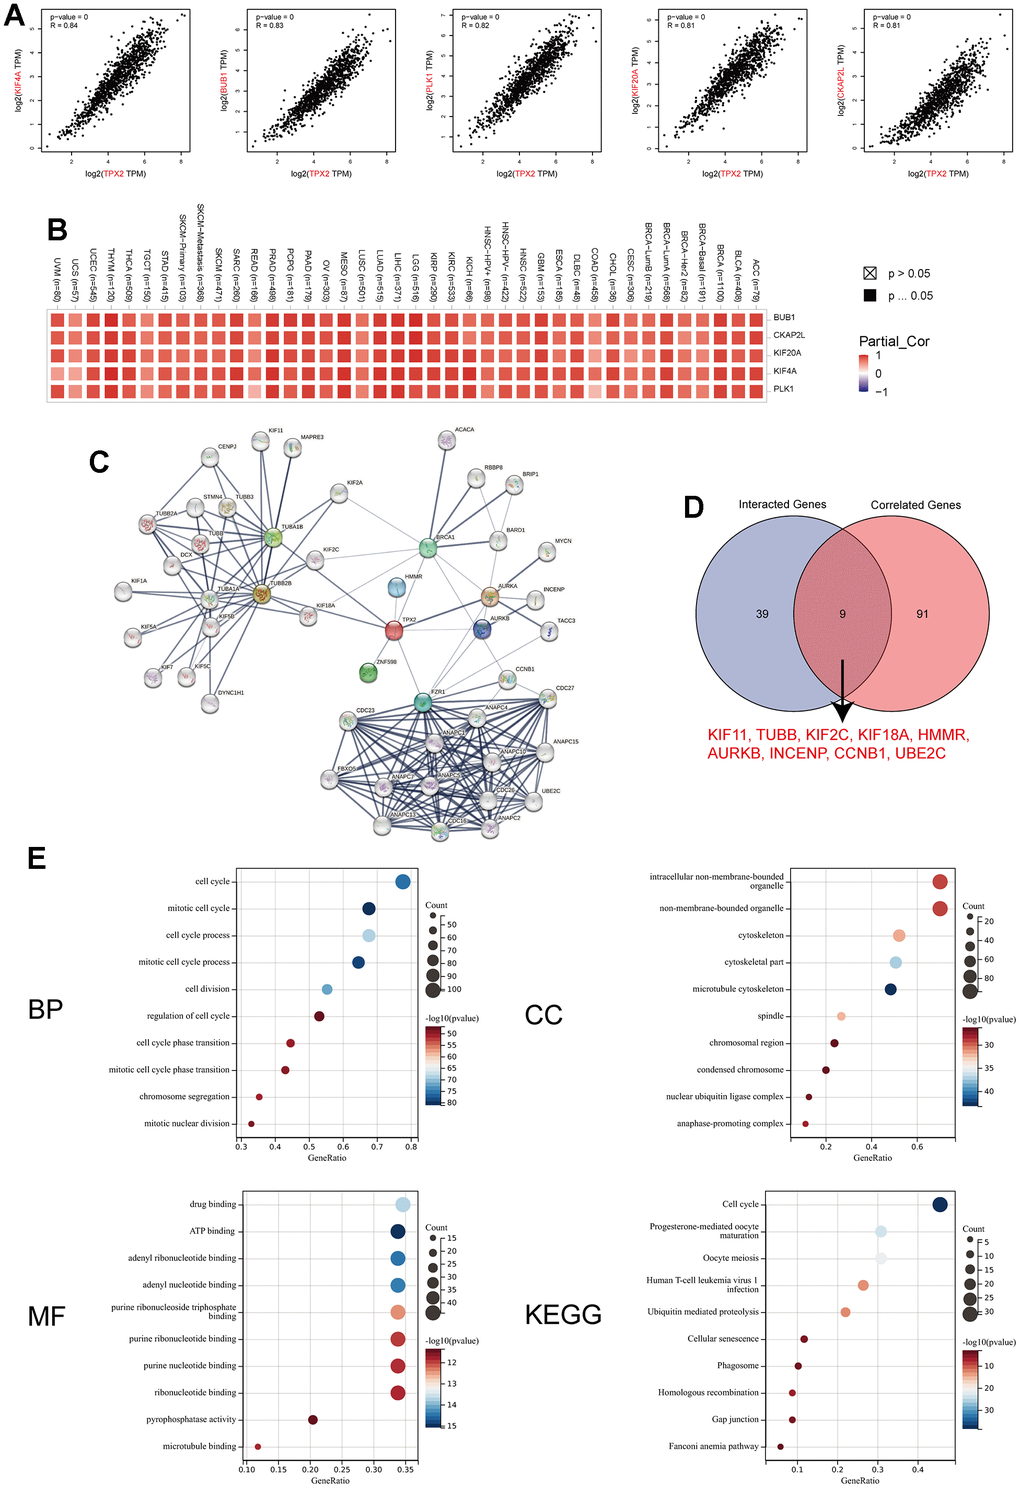 TPX2-related gene network, protein–protein interactions and enrichment analysis. (A) Top 5 TPX2-correlated genes in TCGA database, KIF4A, BUB1, PLK1, KIF20A and CKAP2L, Pearson’s correlation coefficients. (B) The heatmap revealing the correlation between TPX2 expression and these top 5 genes in various tumors. (C) PPI network construction of 48 experimentally verified TPX2-interacted proteins. (D) An intersection analysis of the TPX2-interacted and TPX2-correlated genes. (E) Enrichment analysis illustration based on the TPX2-interacted and TPX2-correlated genes. (BP: biological process; CC: cellular component; MF: molecular function; KEGG: Kyoto Encyclopedia of Genes and Genomes).